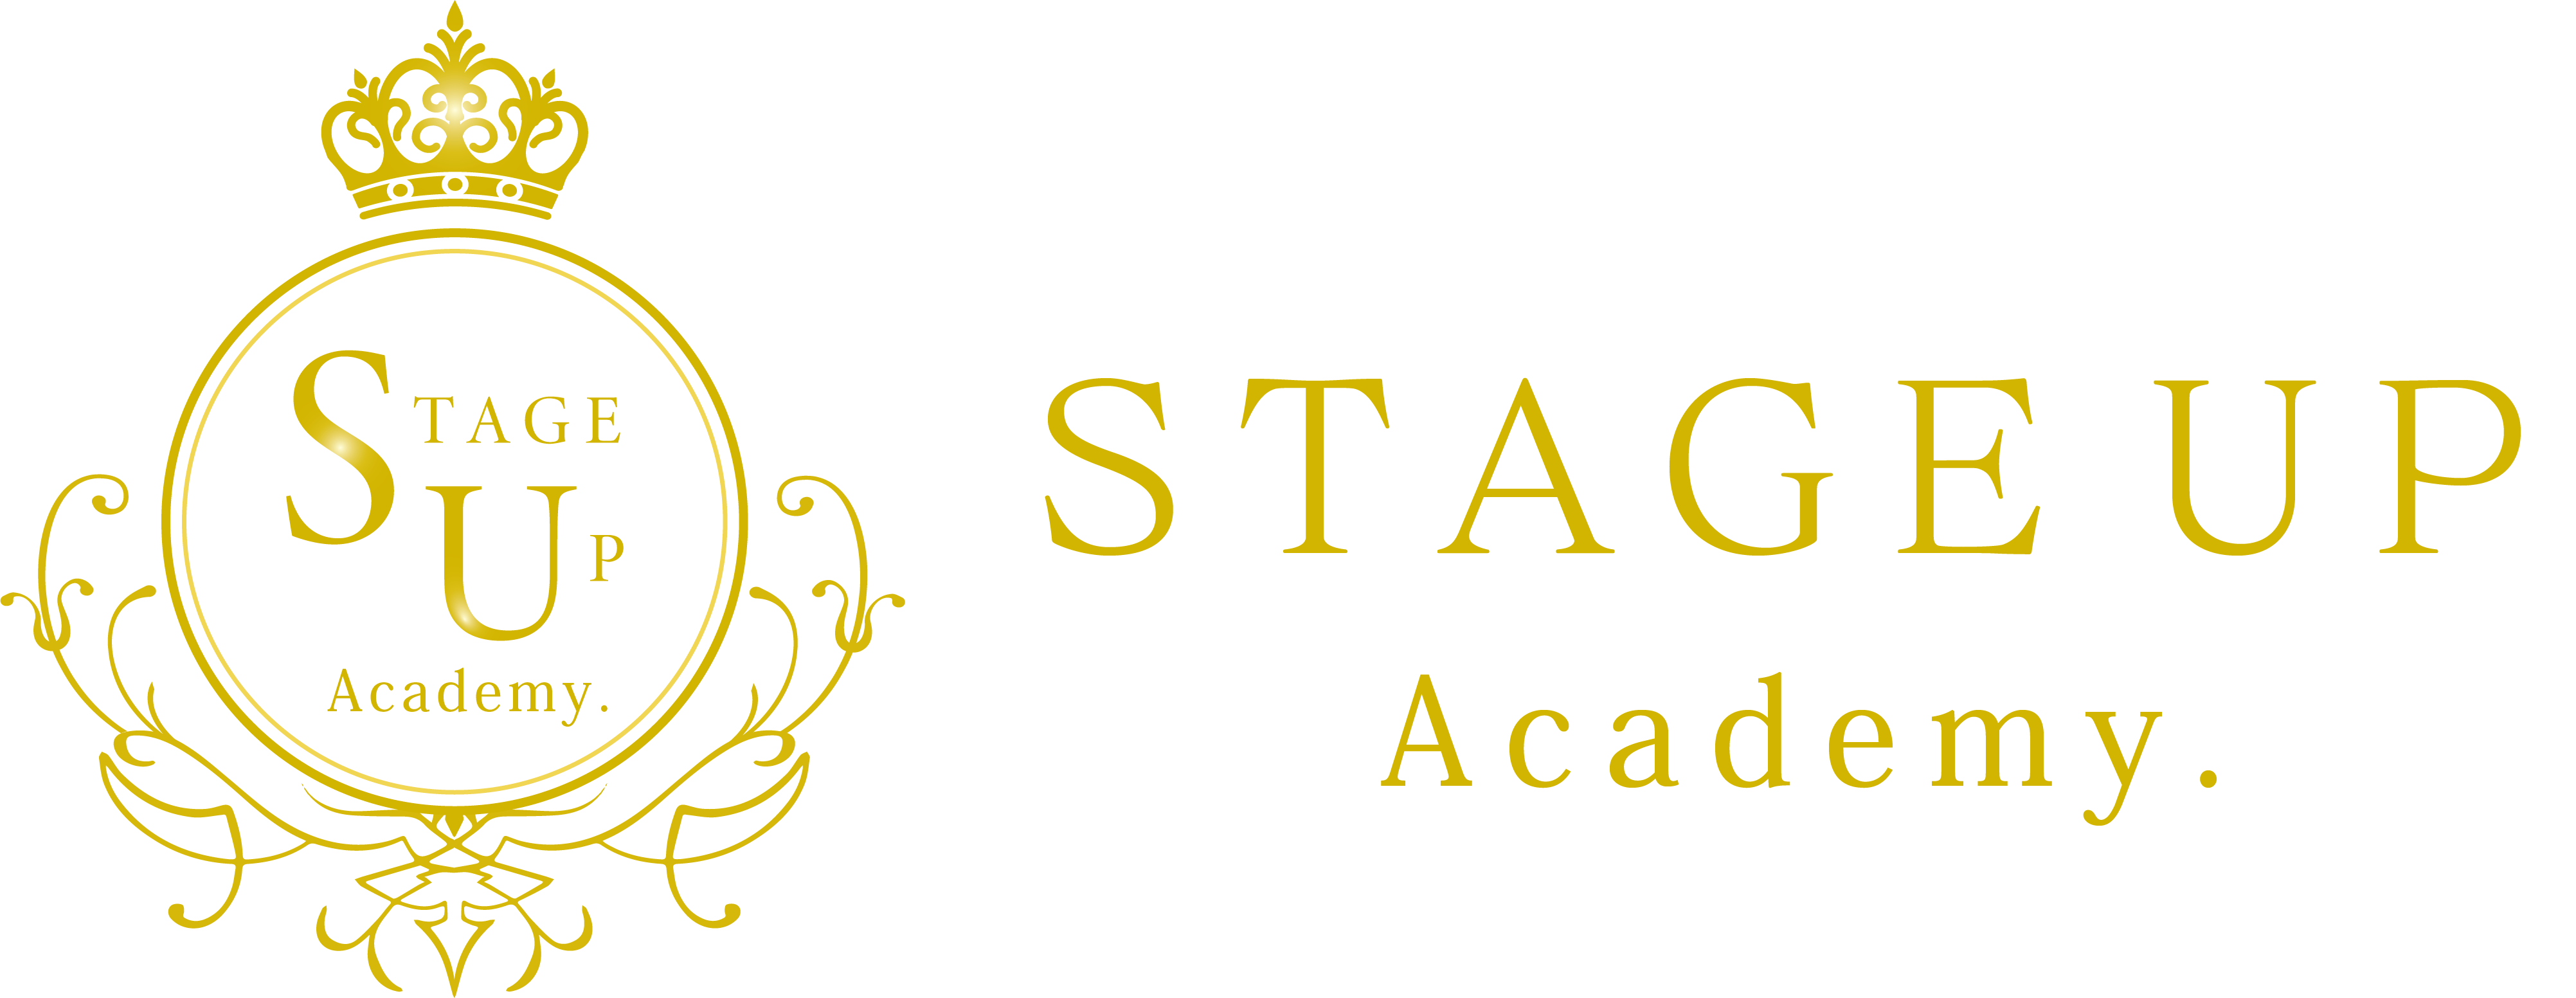 STAGE UP Academy. 公式ホームページ